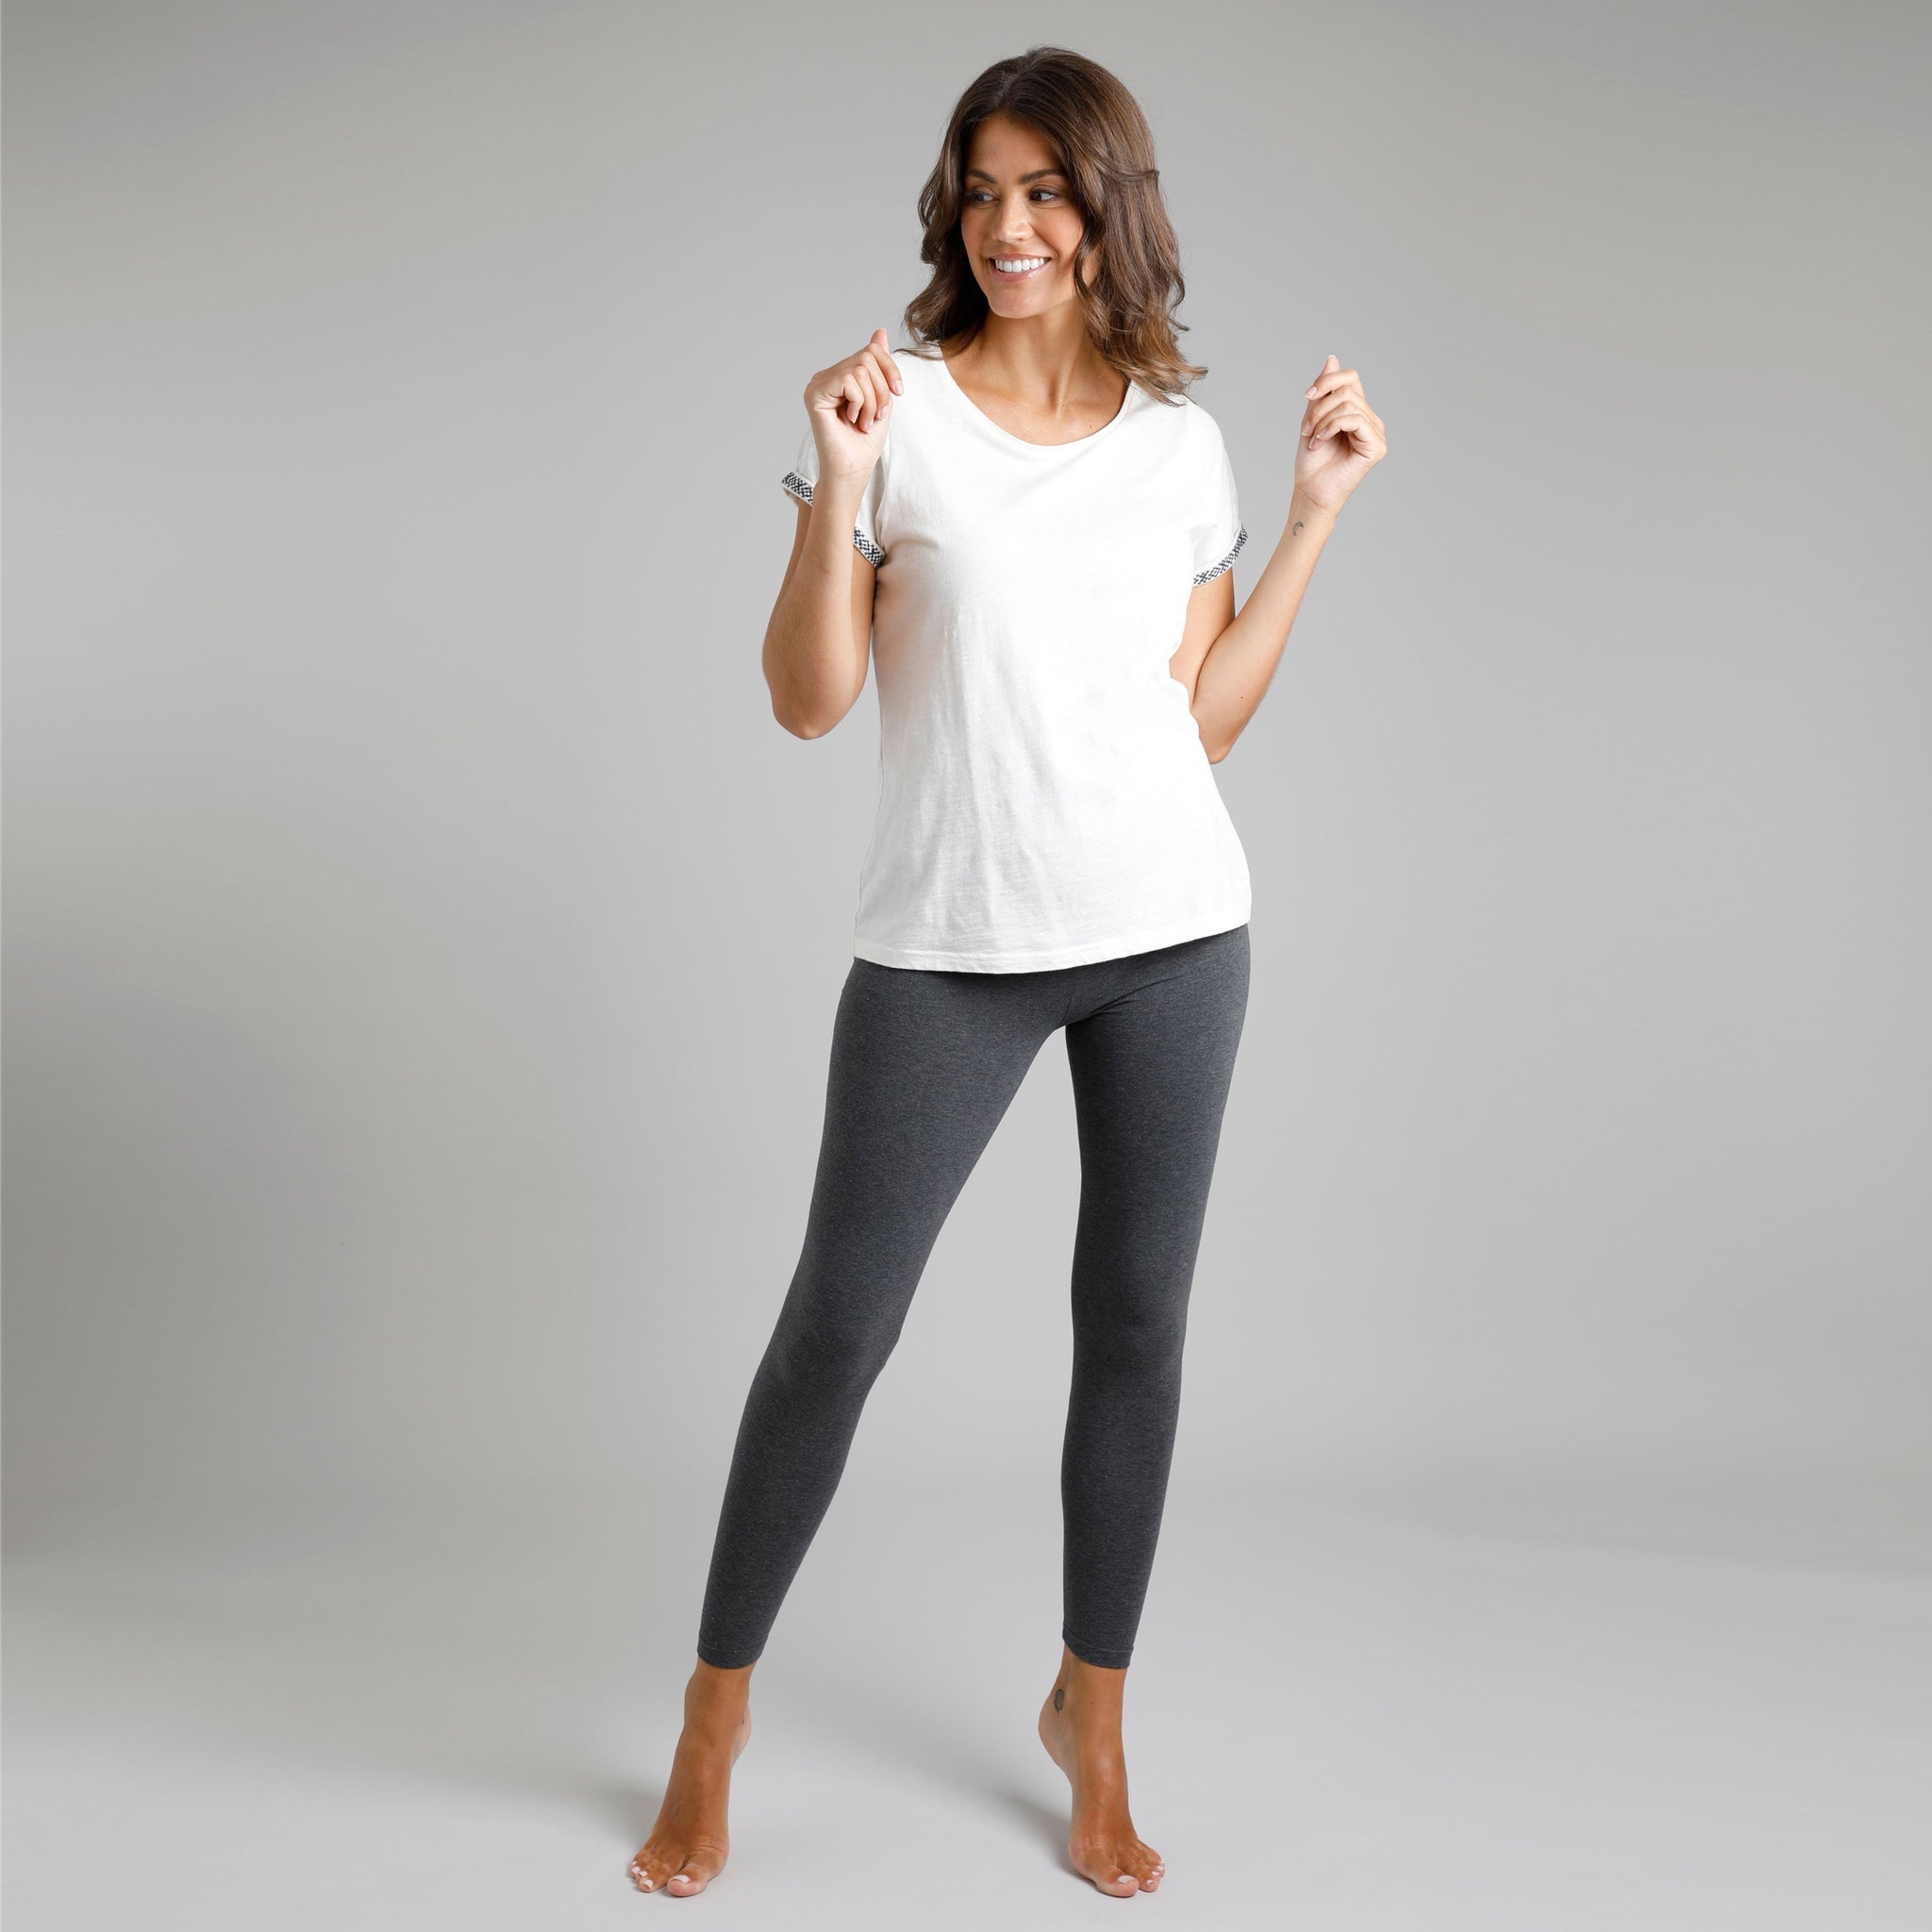 Weird Fish Washed Black Louisa Stretch Leggings – The Cut Label